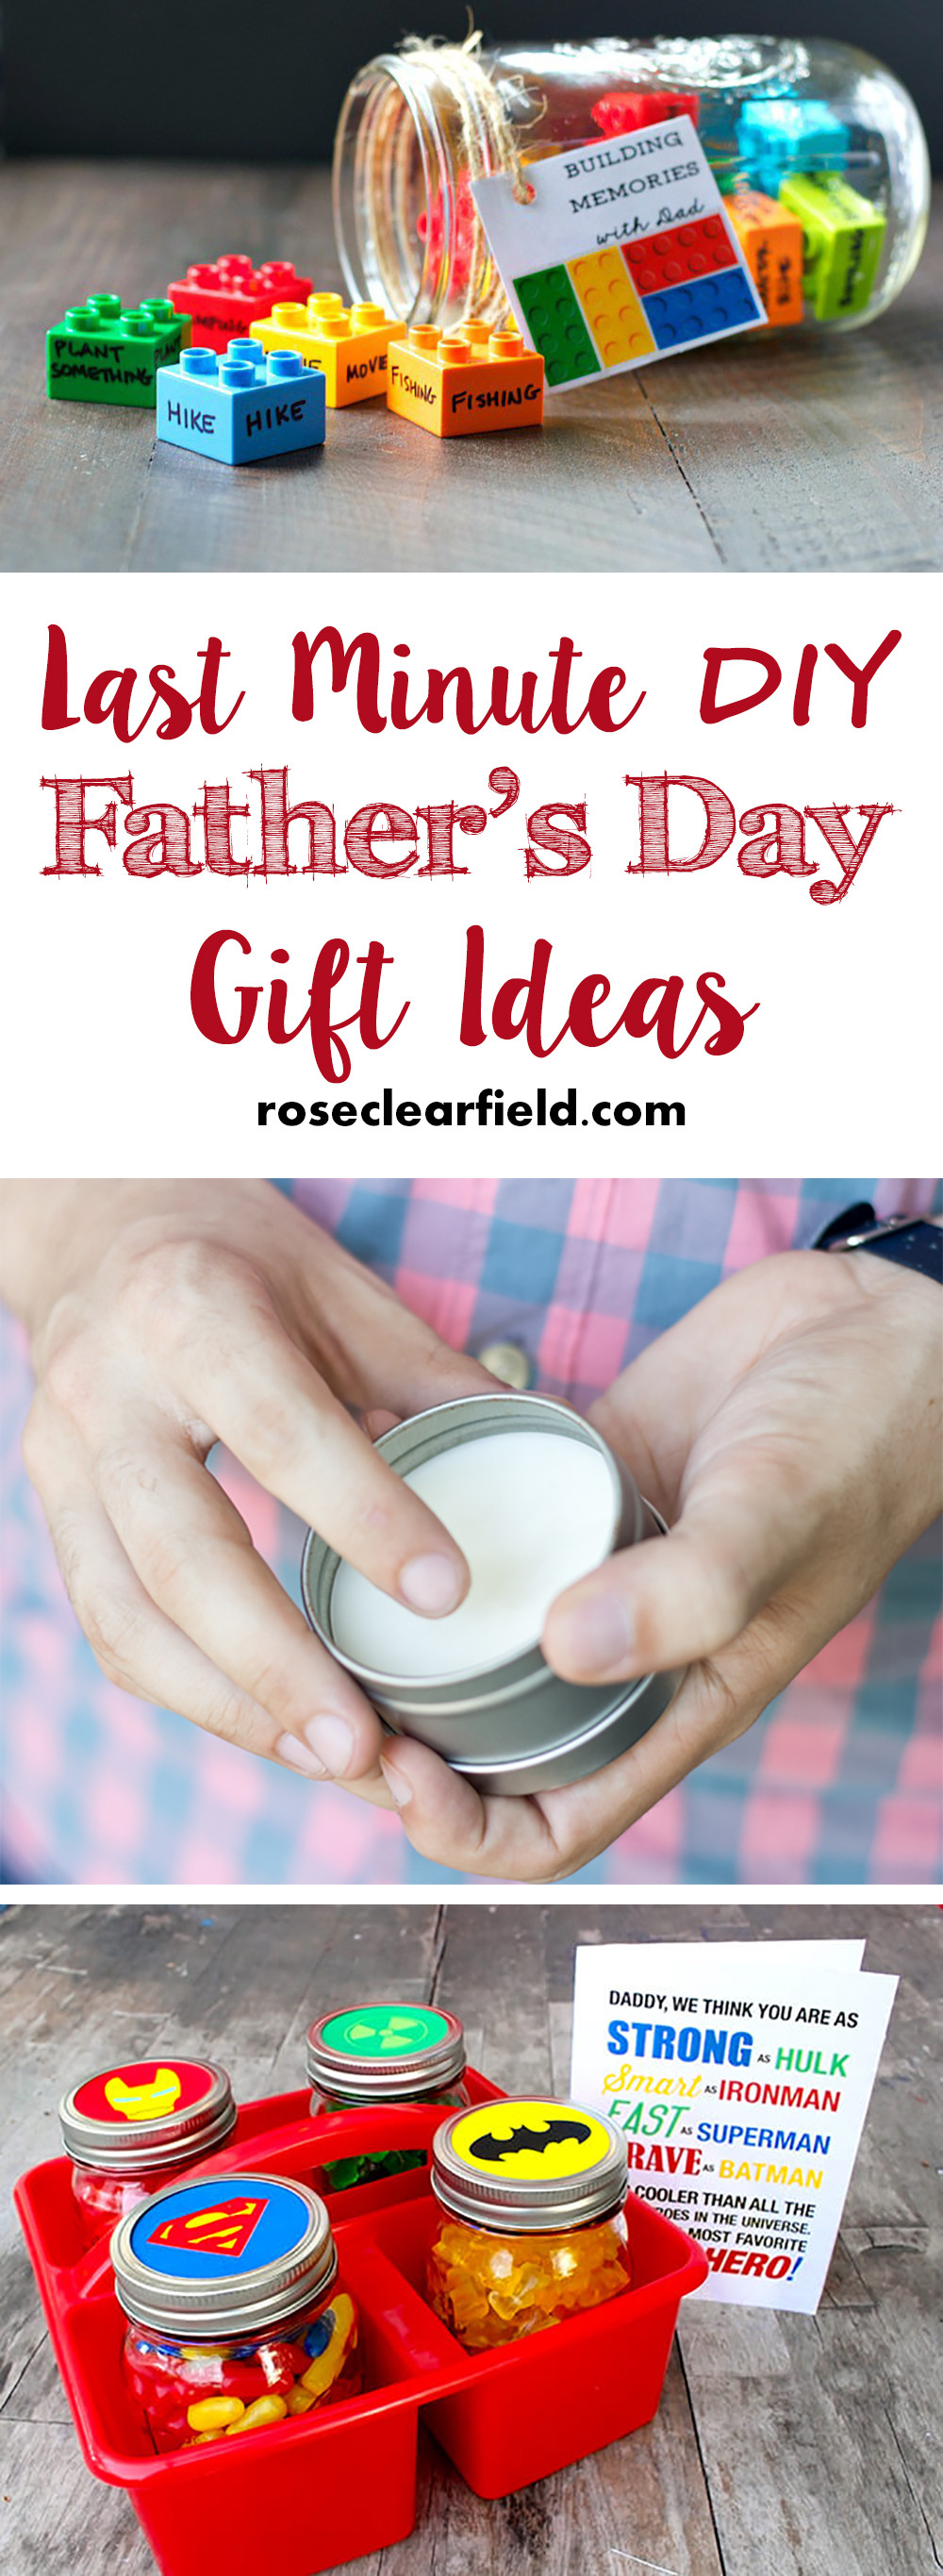 Father'S Day Craft Gift Ideas
 Last Minute DIY Father s Day Gift Ideas • Rose Clearfield